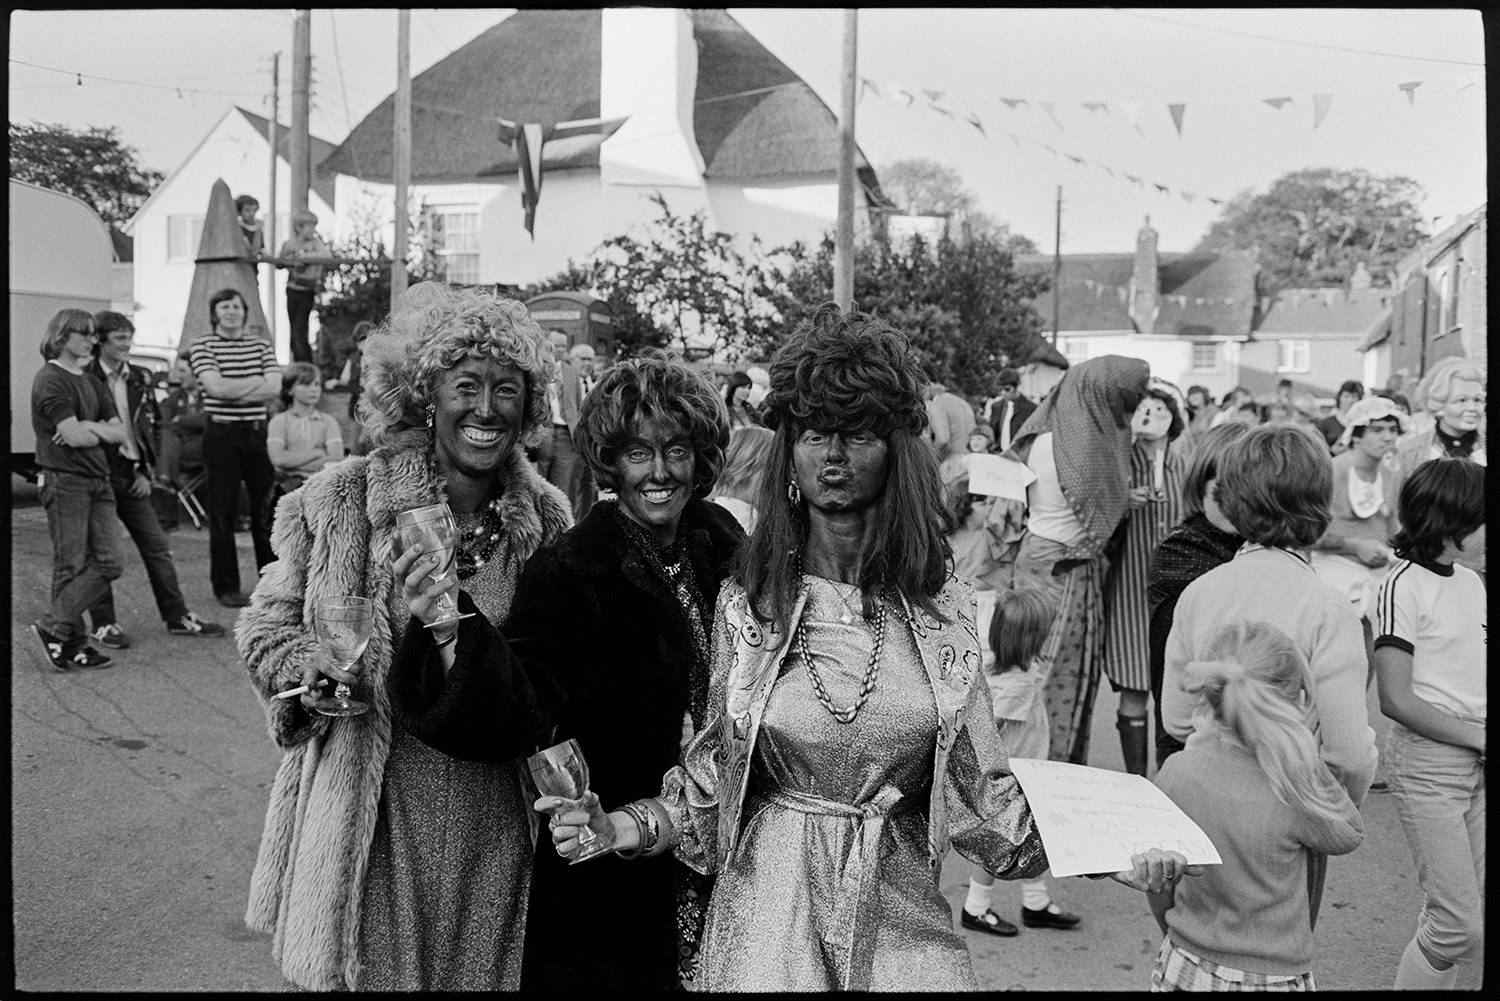 Village Fair, folk clog dancing. Fancy dress, spectators. 
[Three women in fancy dress and holding wine glasses at Winkleigh Fair. Other people, some also in fancy dress, can be seen in the background. Winkleigh square is decorated with bunting.]